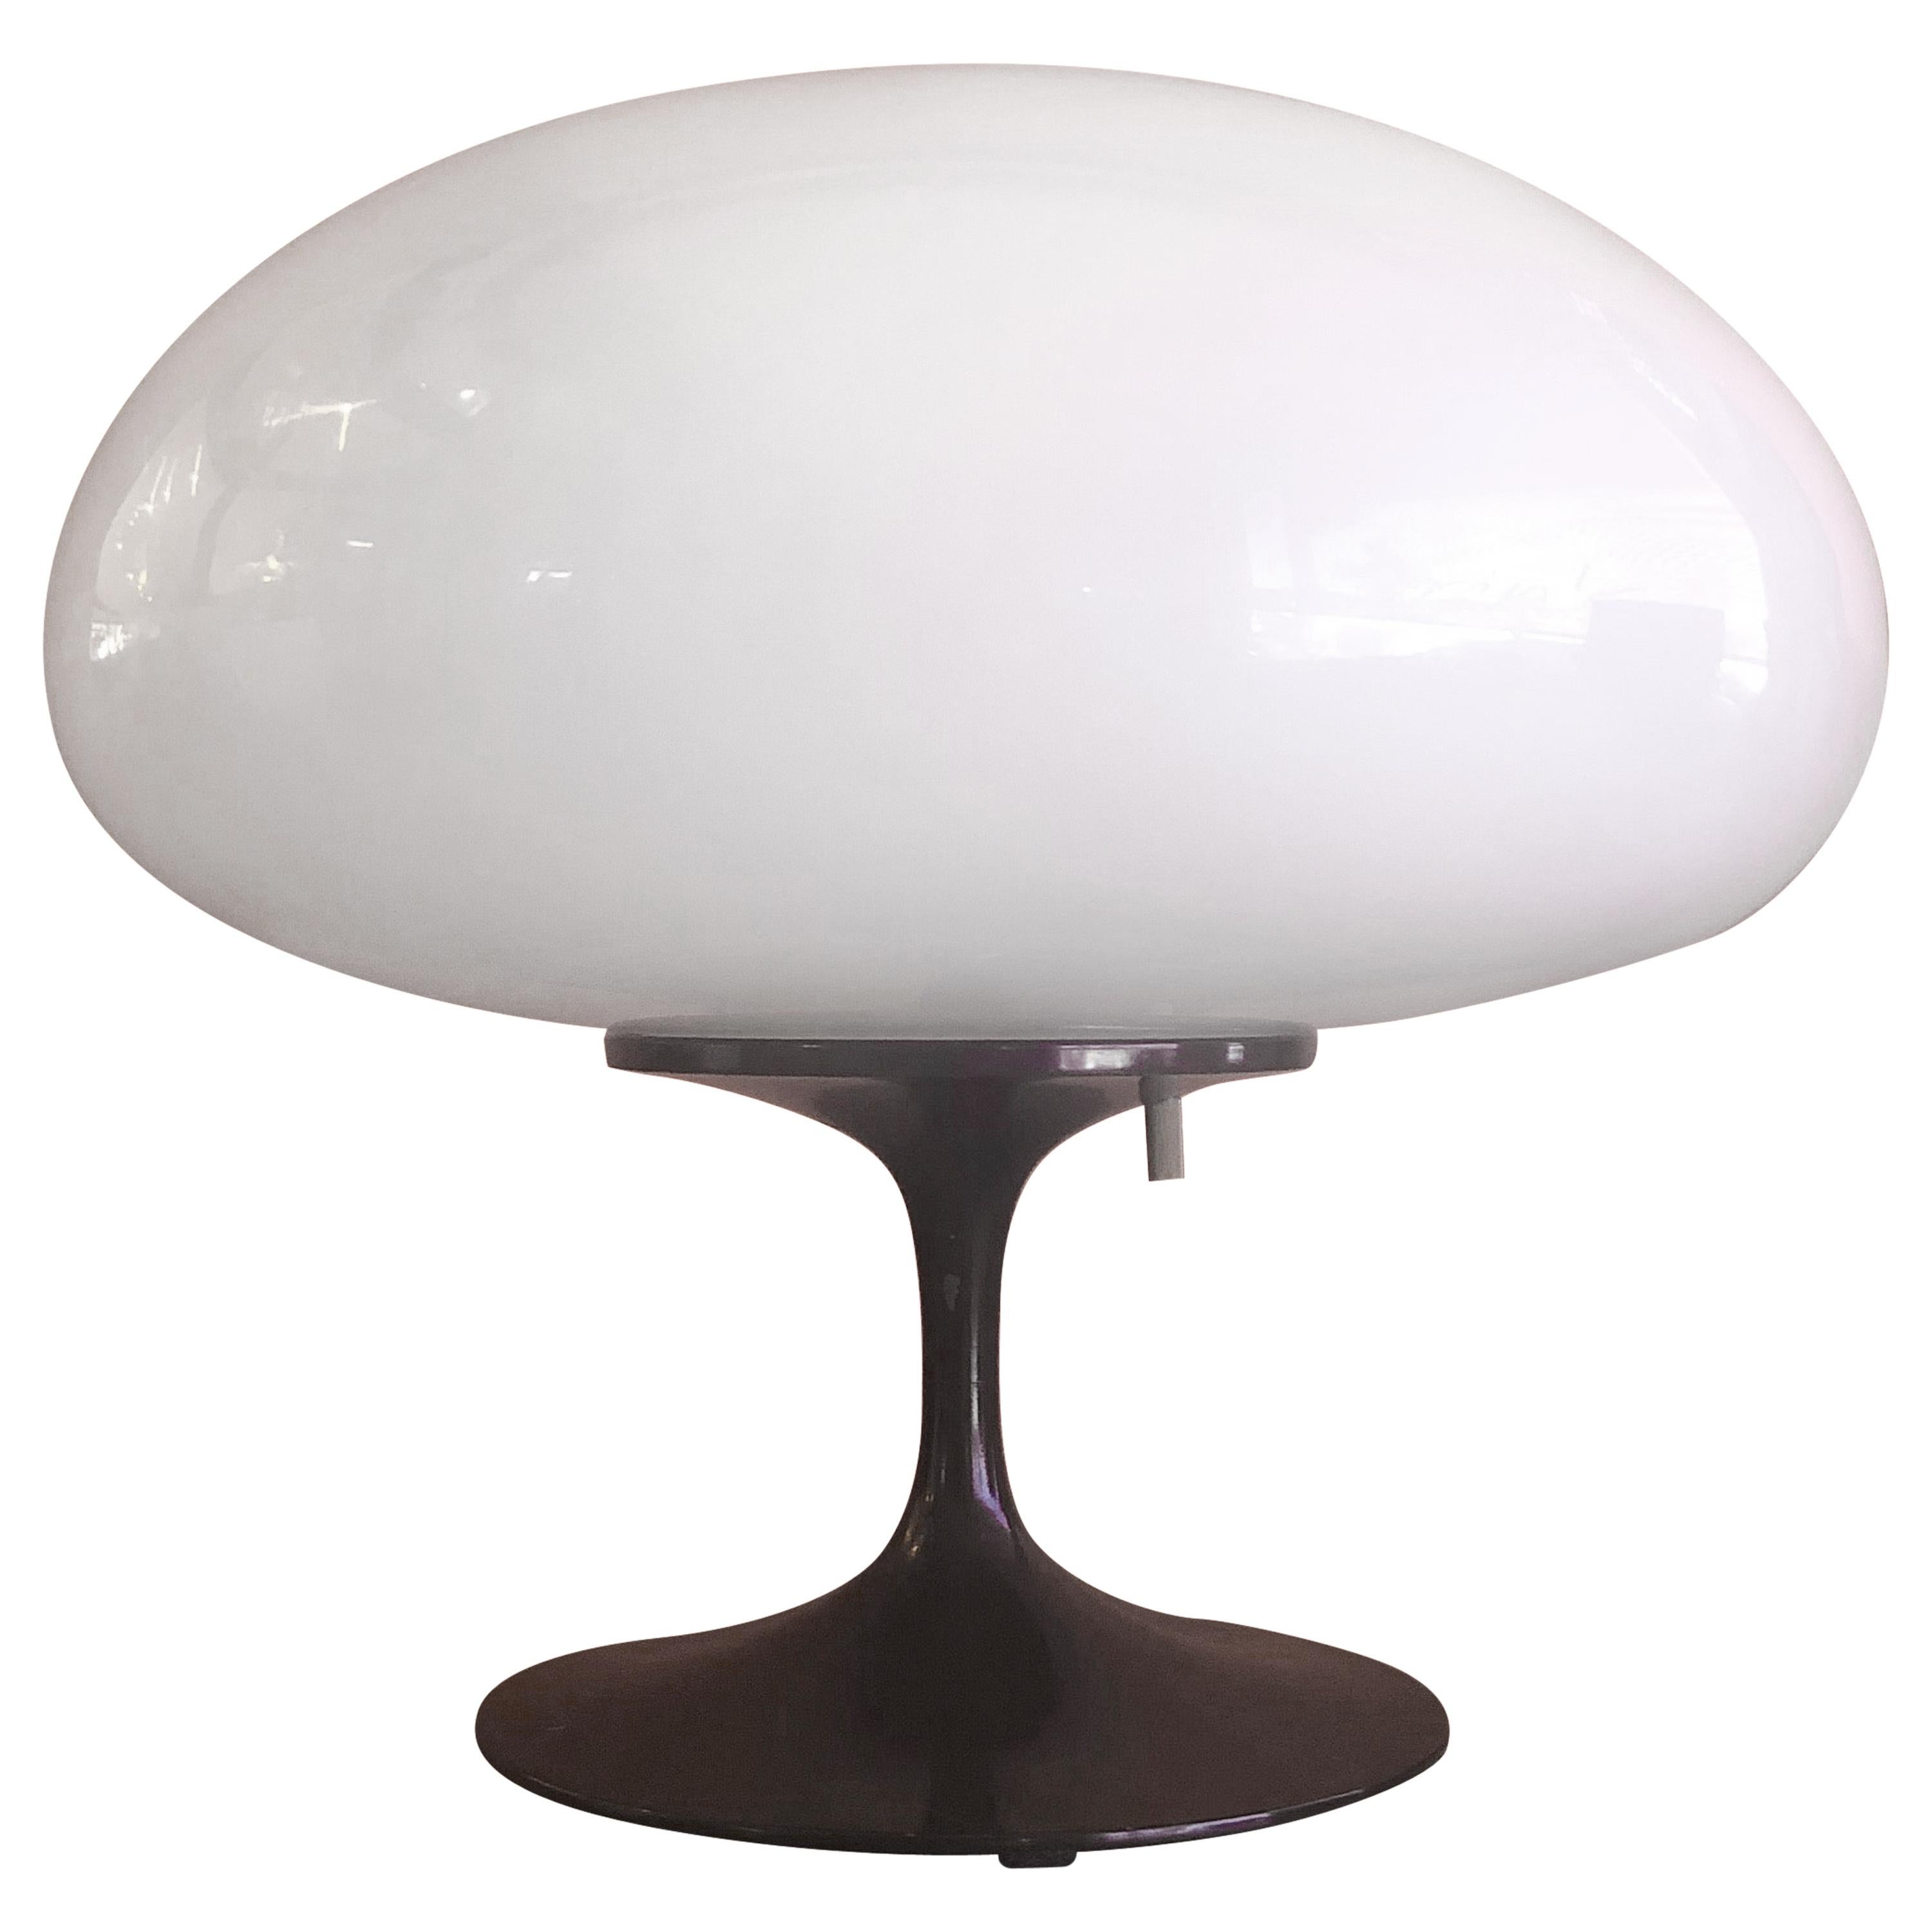 Low Mushroom Lamp with Brown Base and Art Glass Shade by Laurel Lamp Co.